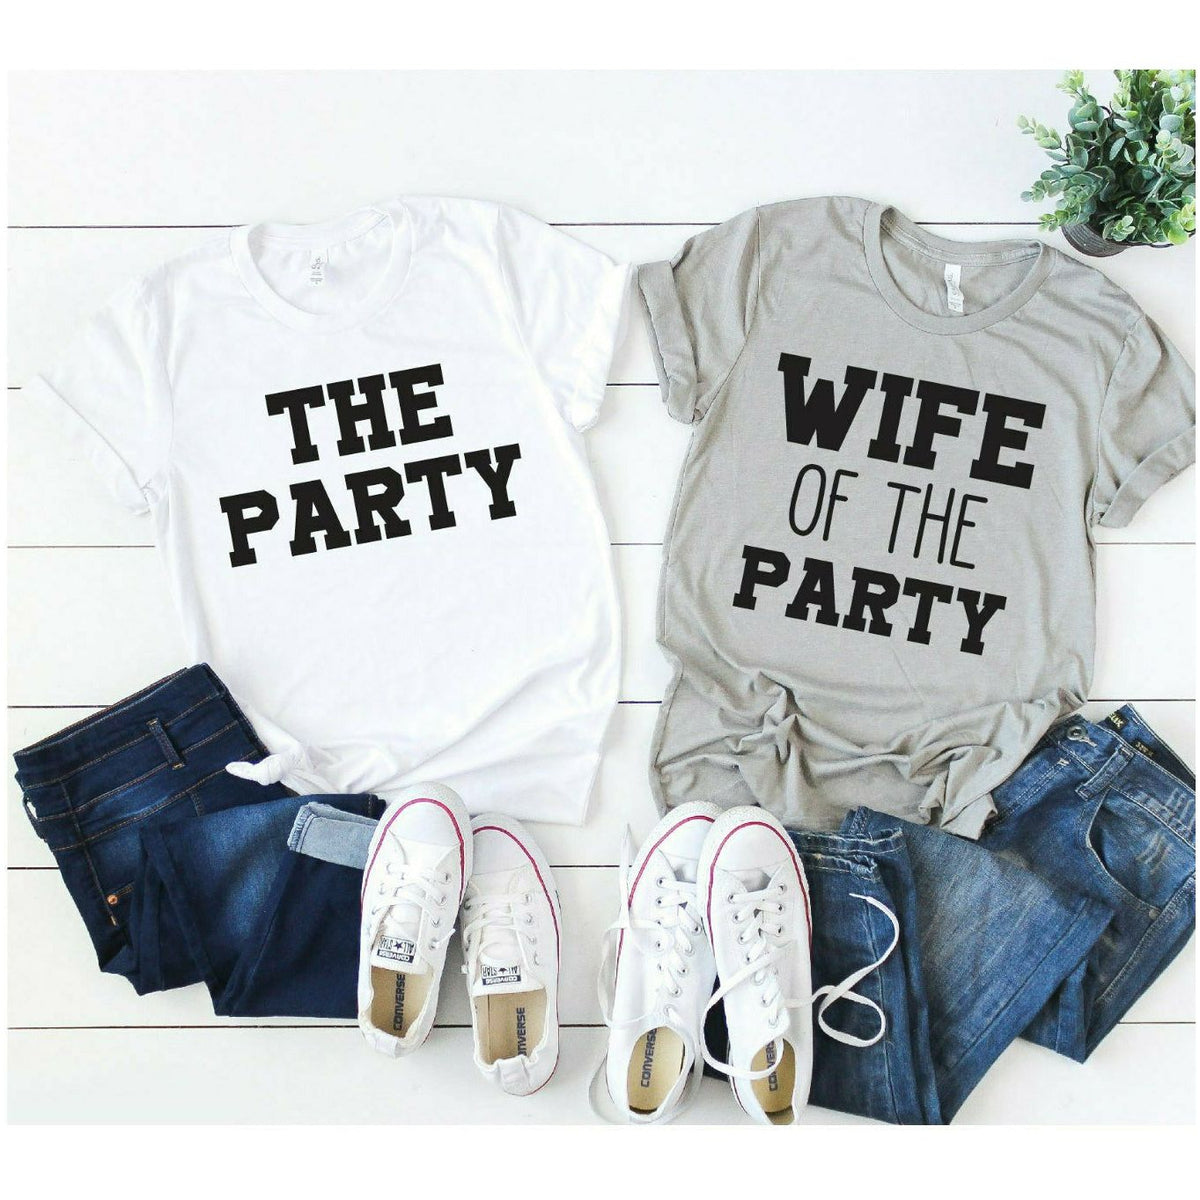 Wife of the party or party tee